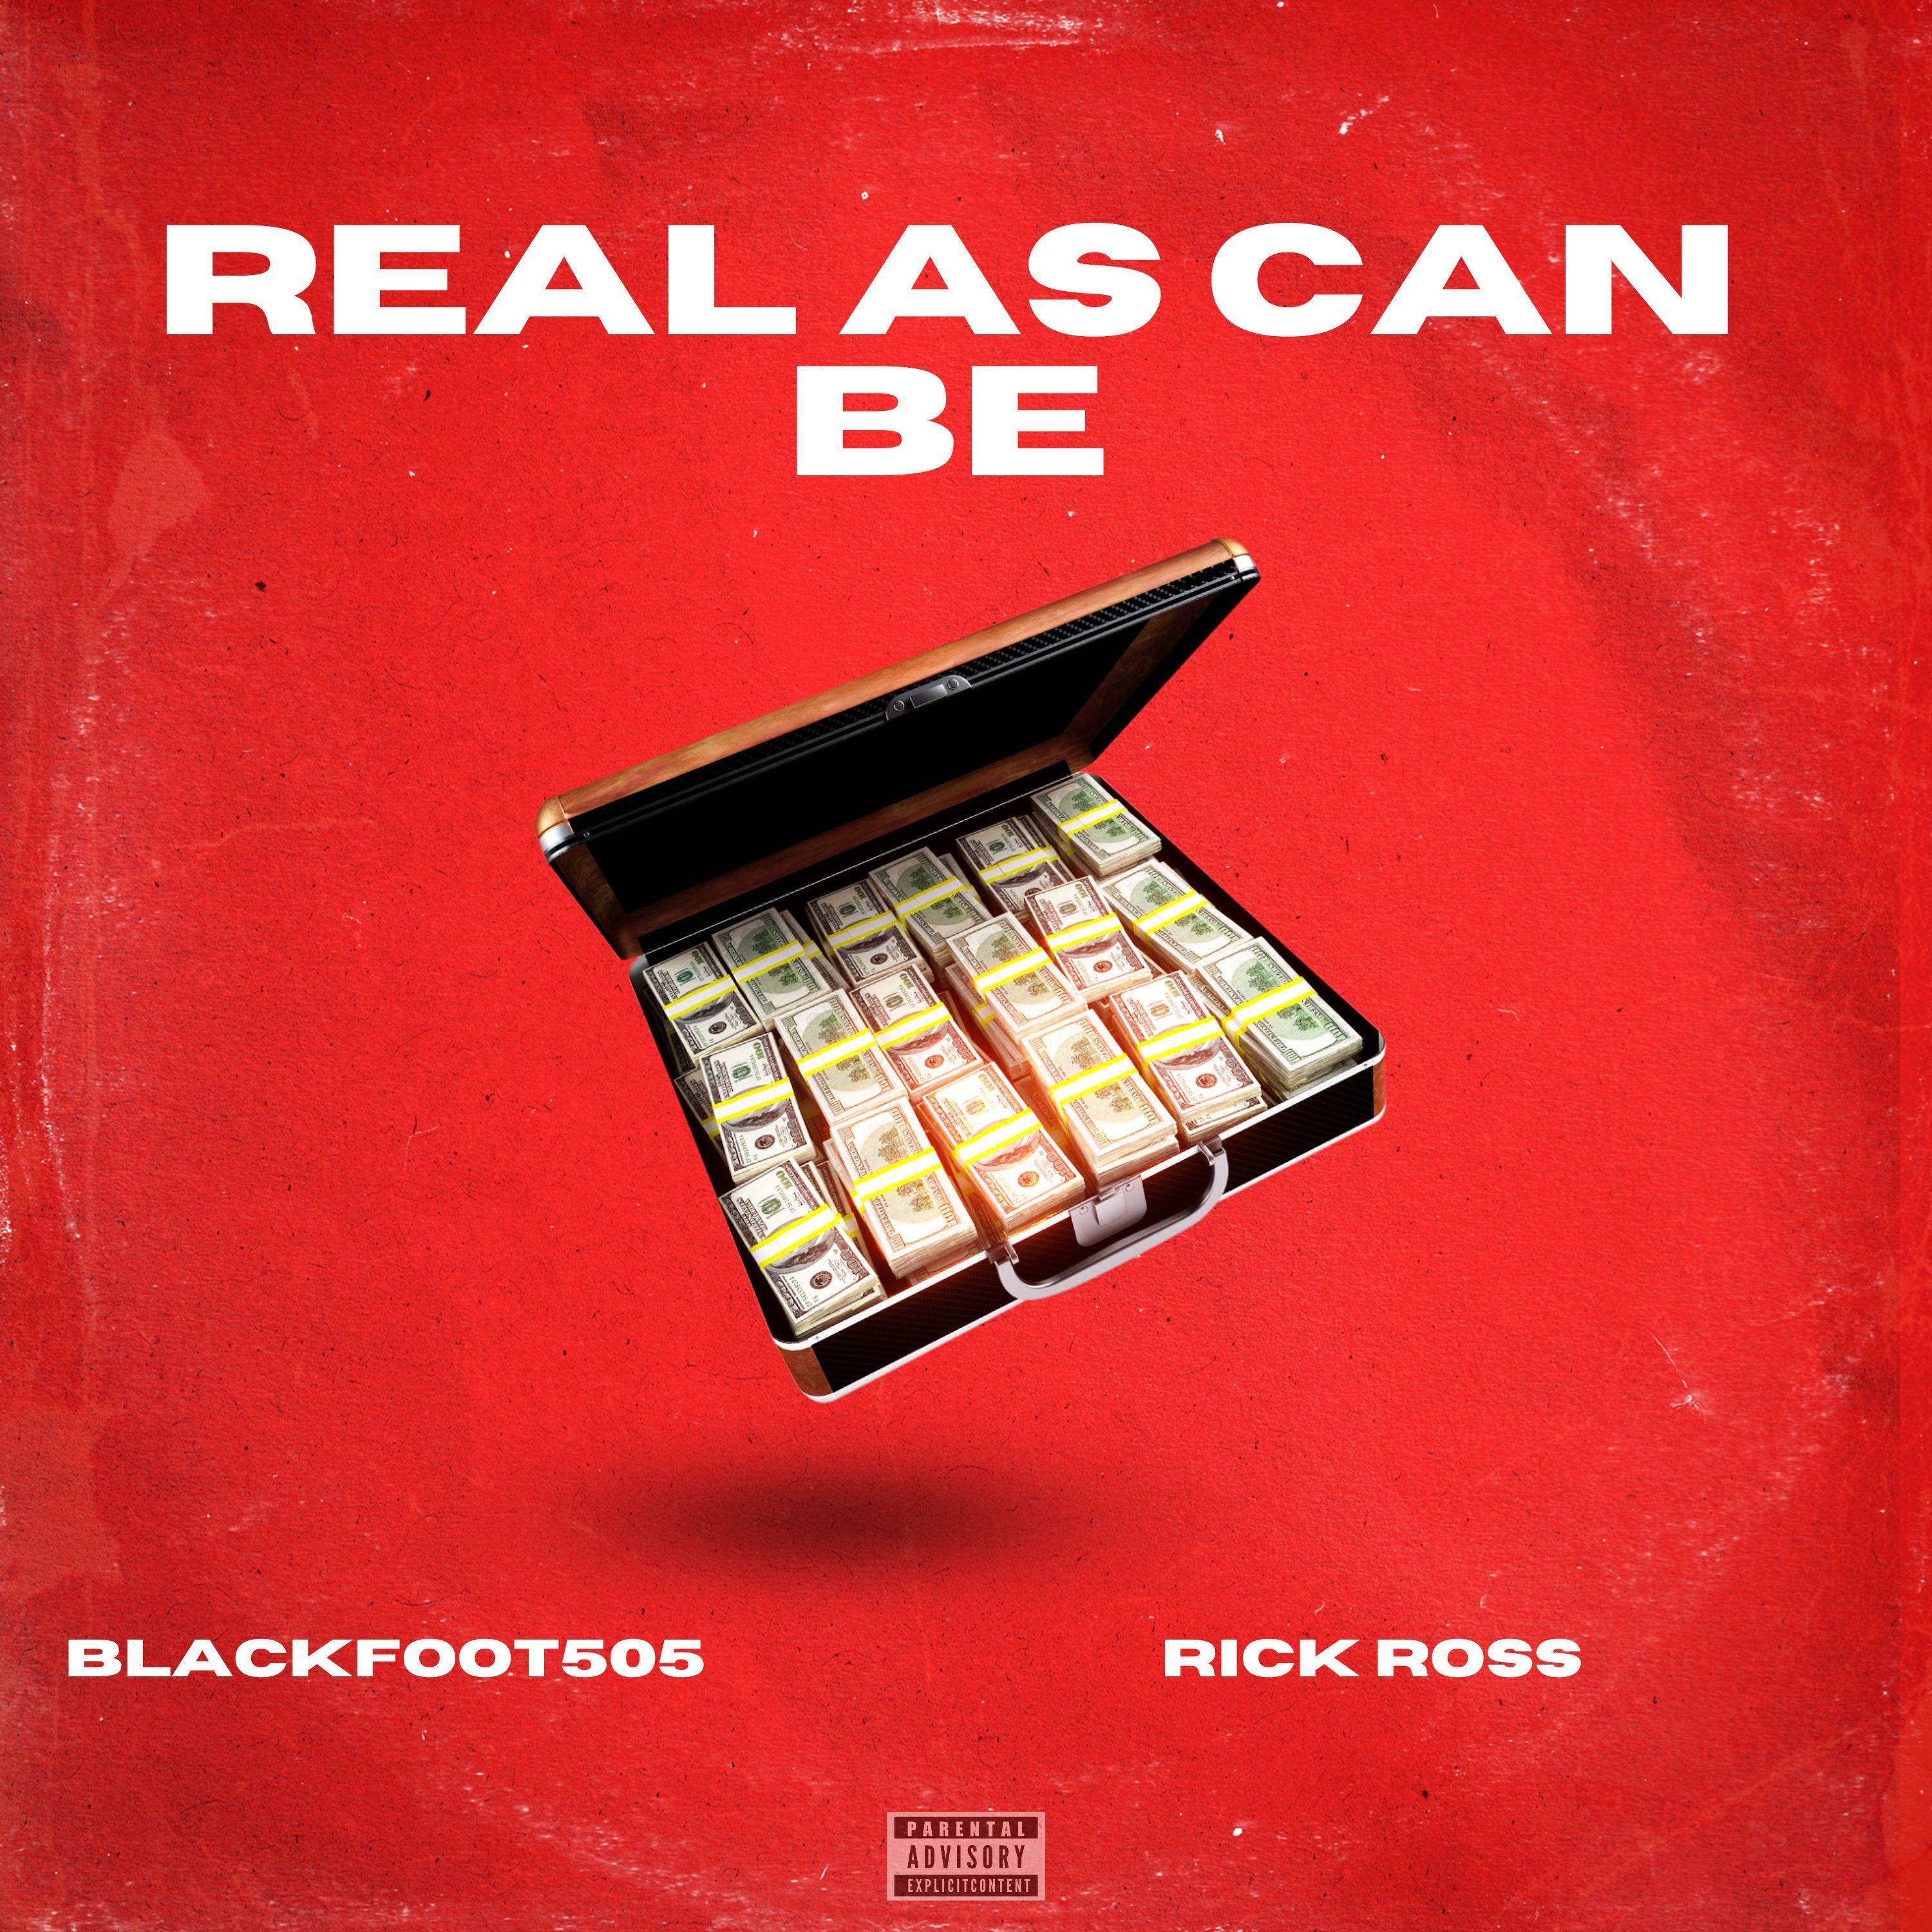 Blackfoot505 - Real As Can Be (feat. Rick Ross)